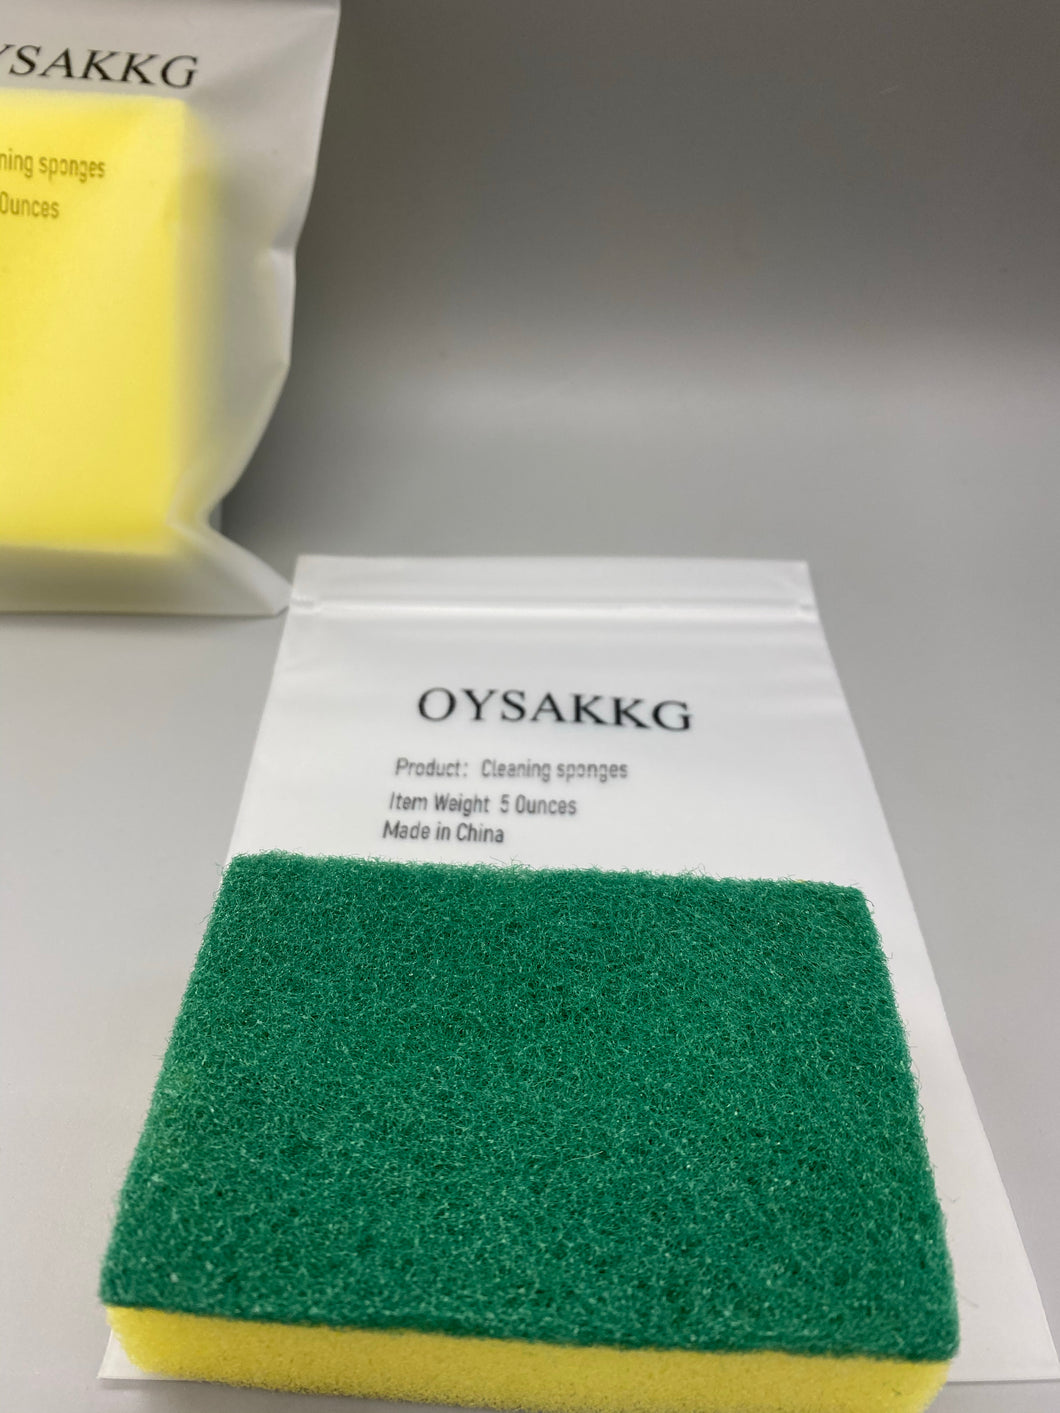 OYSAKKG Cleaning sponges,Dishwashing Sponge Along with A Thought Scouring Pad -Ideal for Cleaning Kitchen ,Dishes, Bathroom- Yellow- 4 Dish sponges,Made from Tough Cellulose